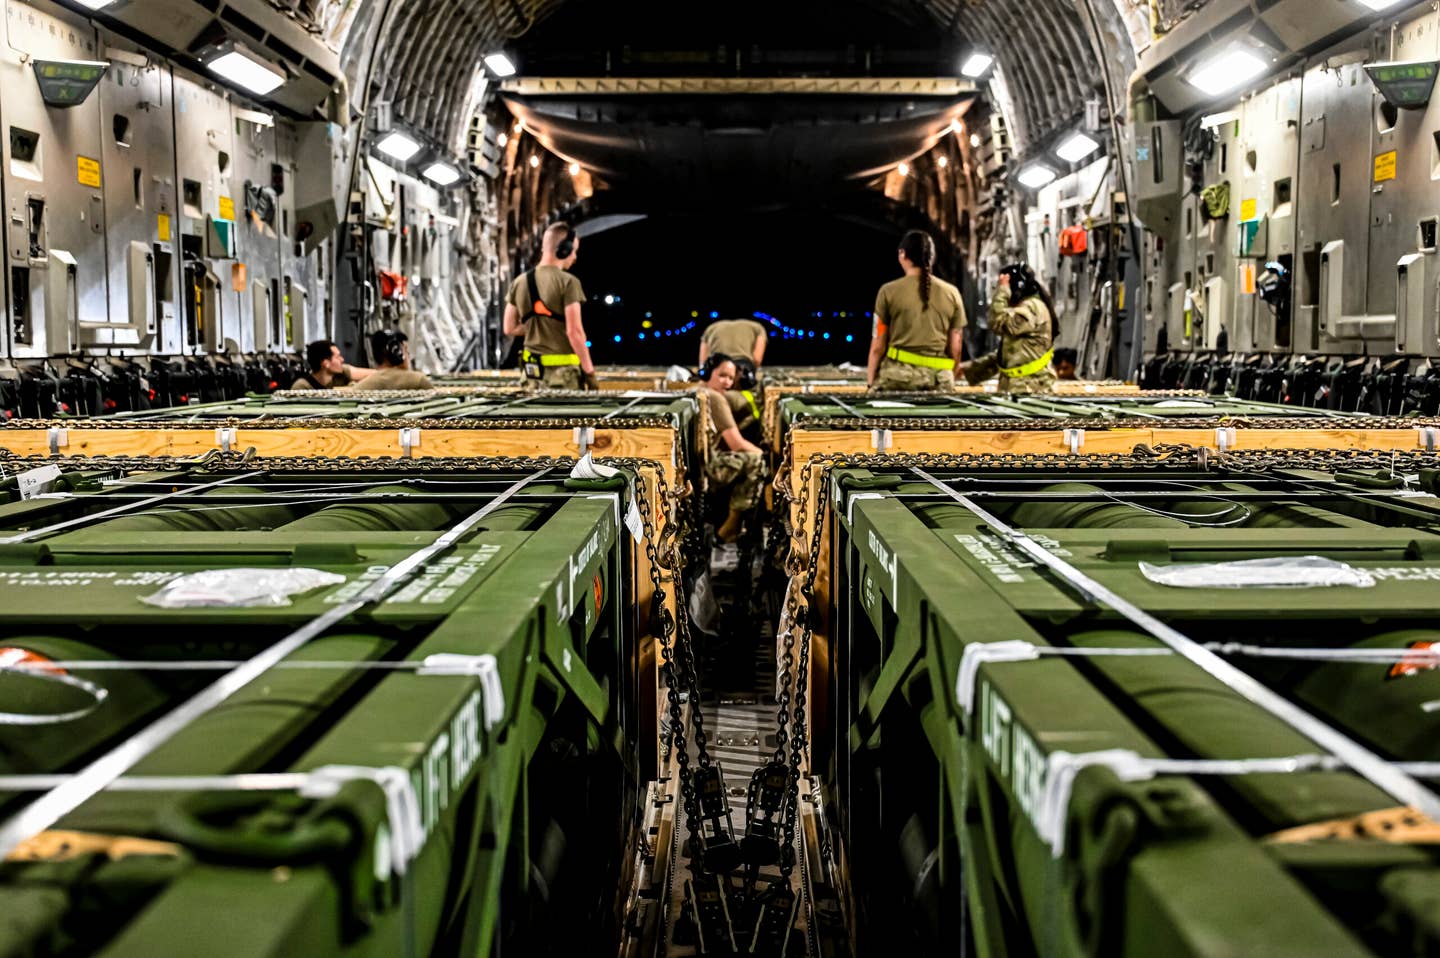 Airmen assigned to the 305th Aerial Port Squadron, upload Guided Multiple Launch Rocket System munitions onboard a Boeing 767 at Joint Base McGuire-Dix-Lakehurst, N.J., Aug. 13, 2022. USAF Photo by Senior Airman Matt Porter